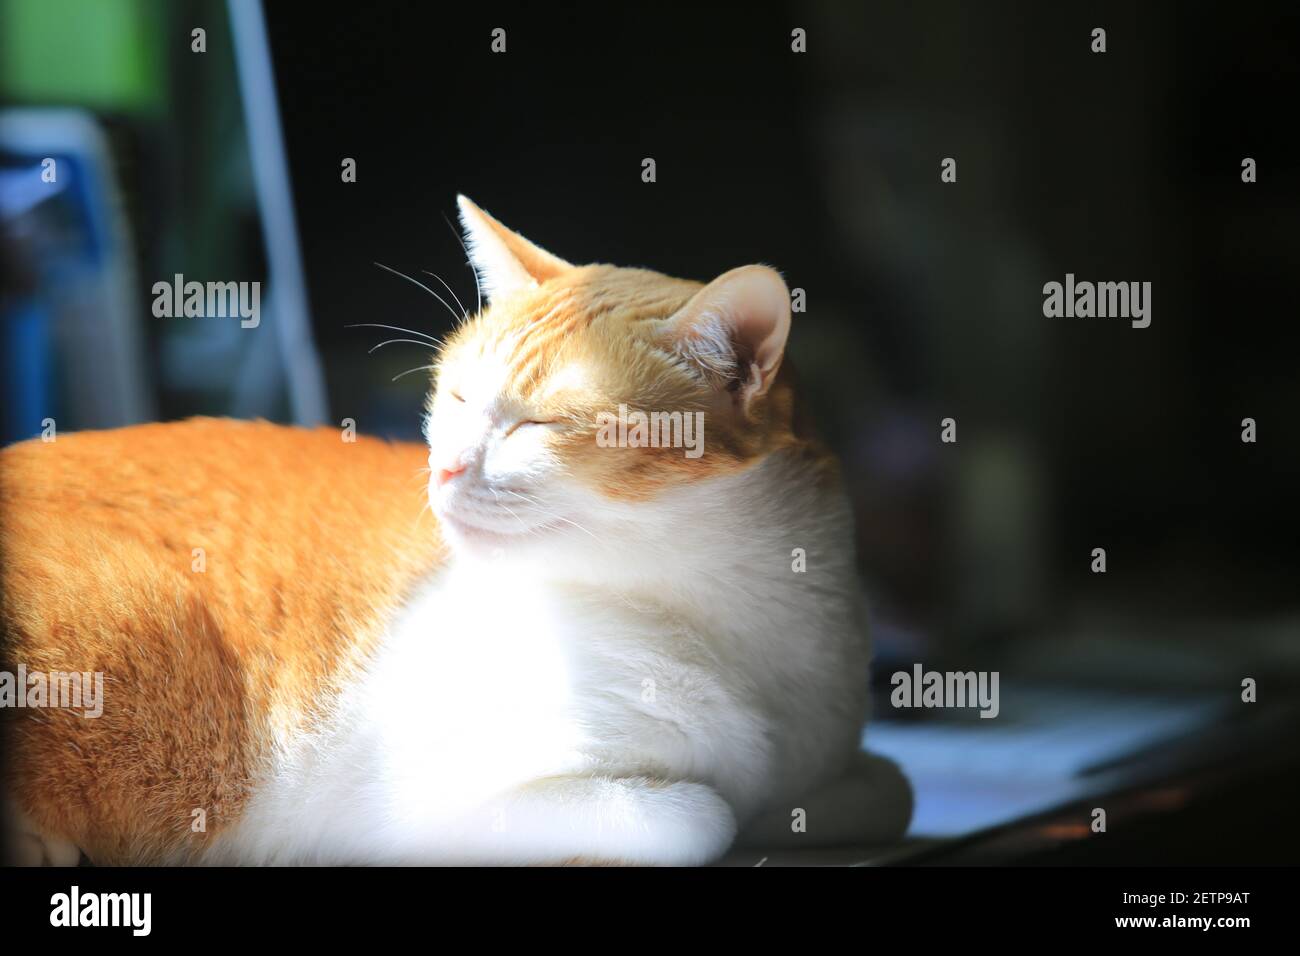 cat feel comfortable at home Stock Photo